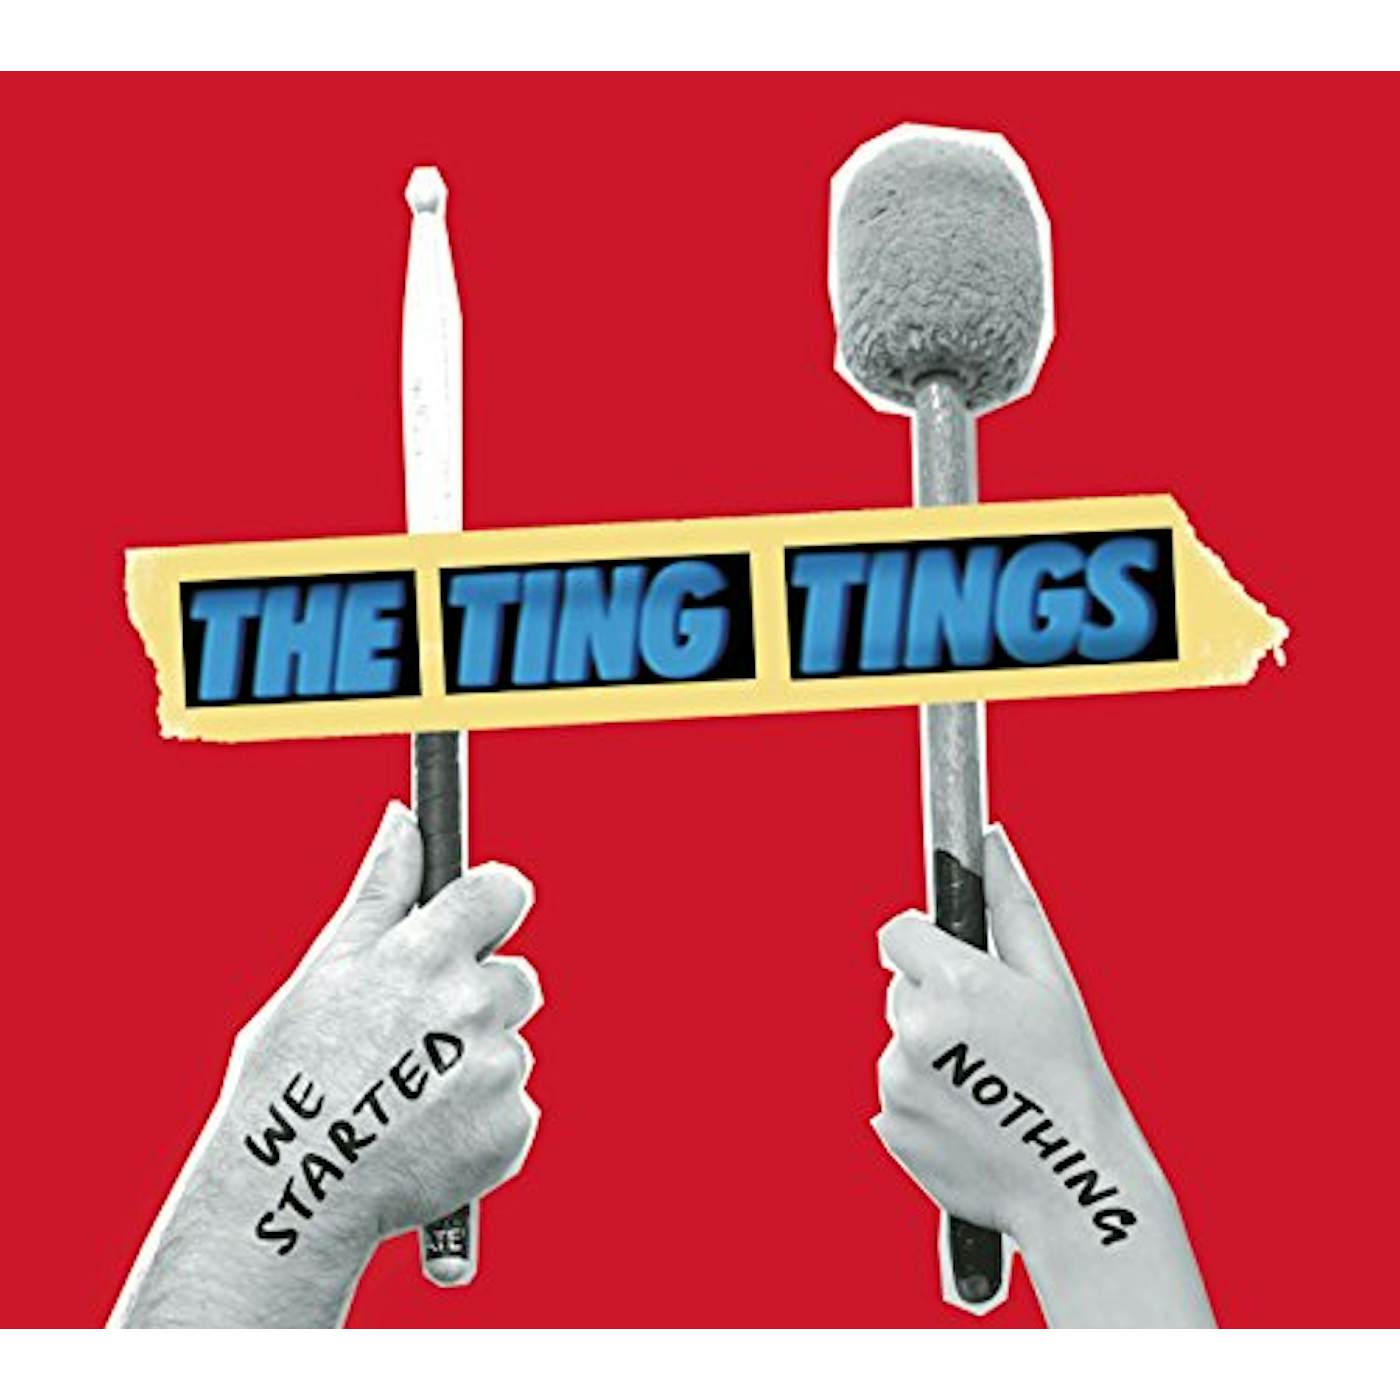 The Ting Tings We Started Nothing Vinyl Record